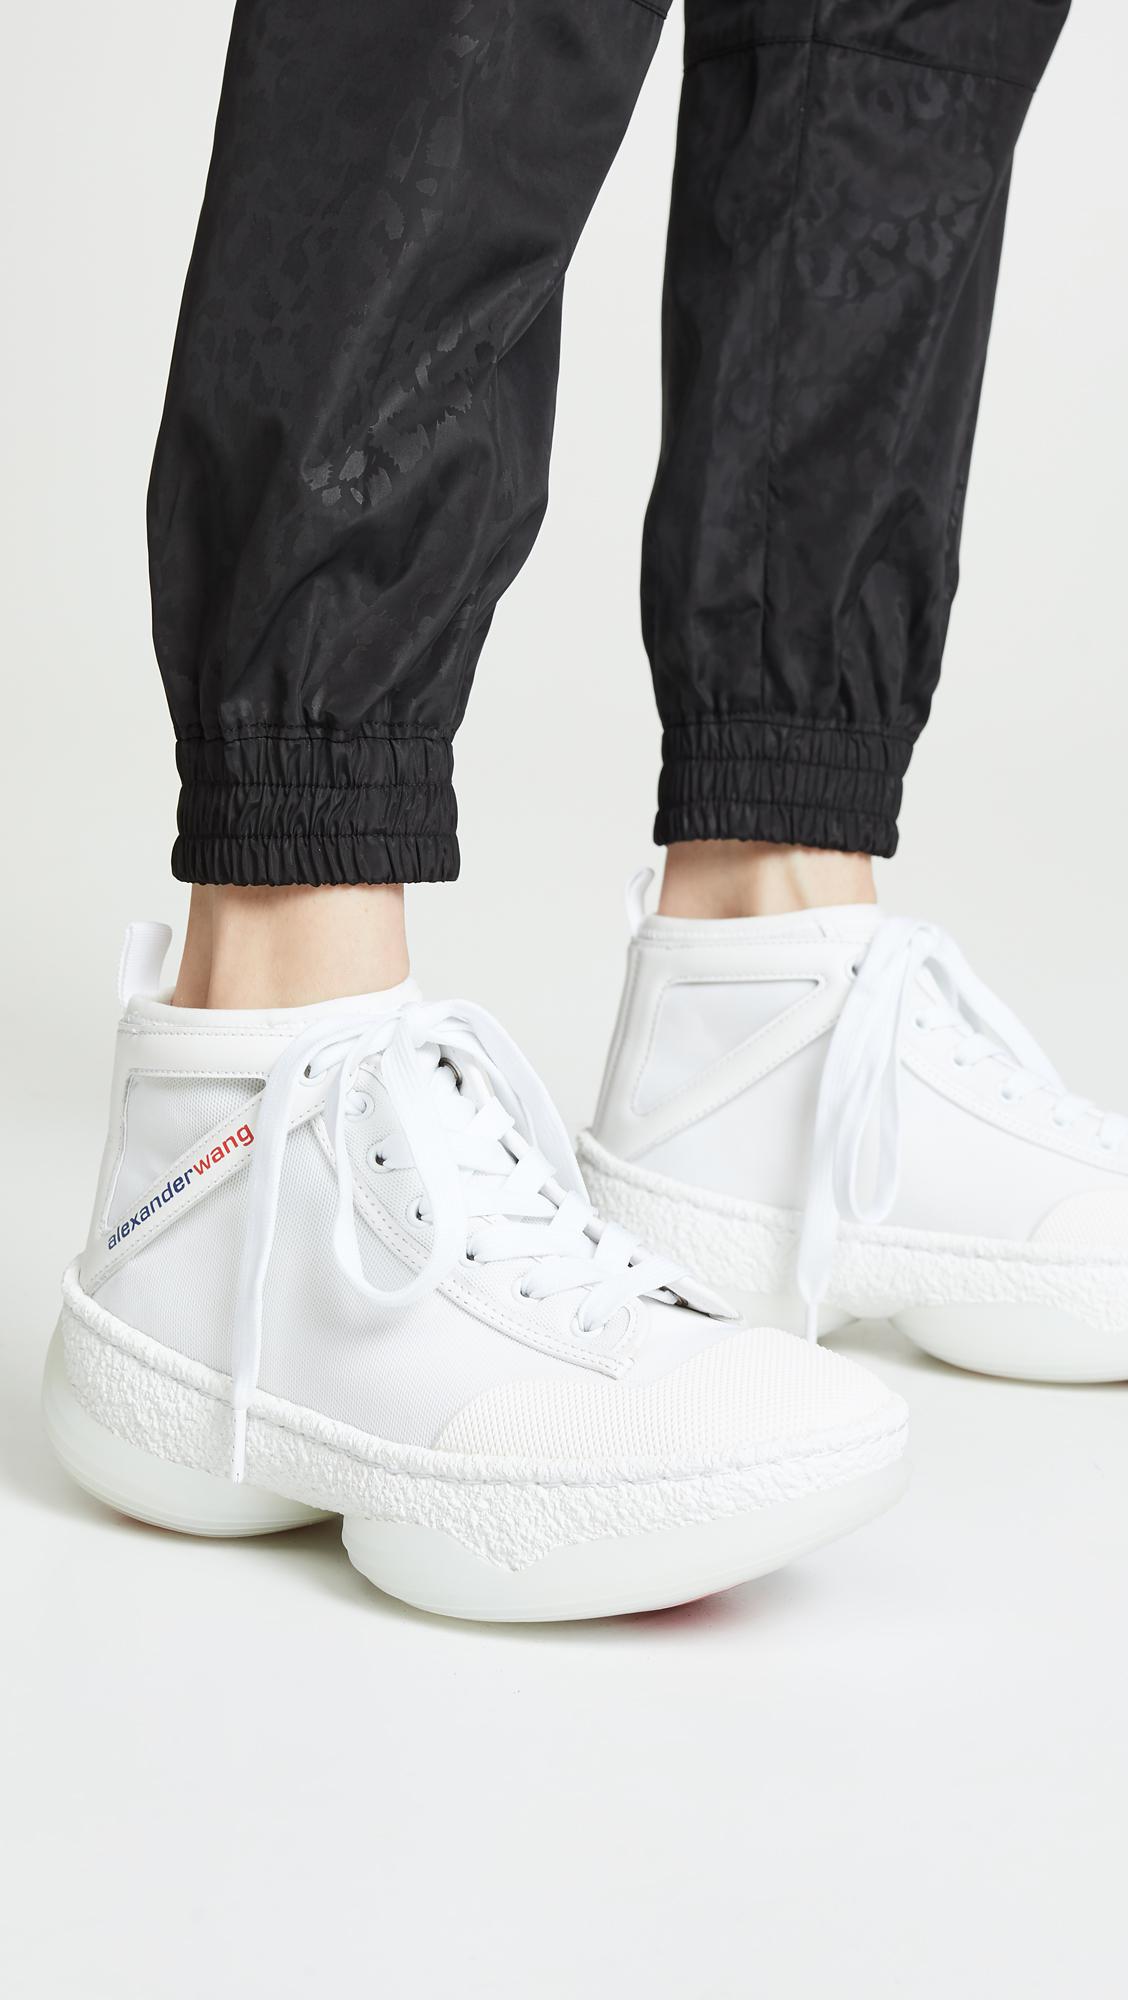 Alexander Wang A1 Sneakers in White | Lyst